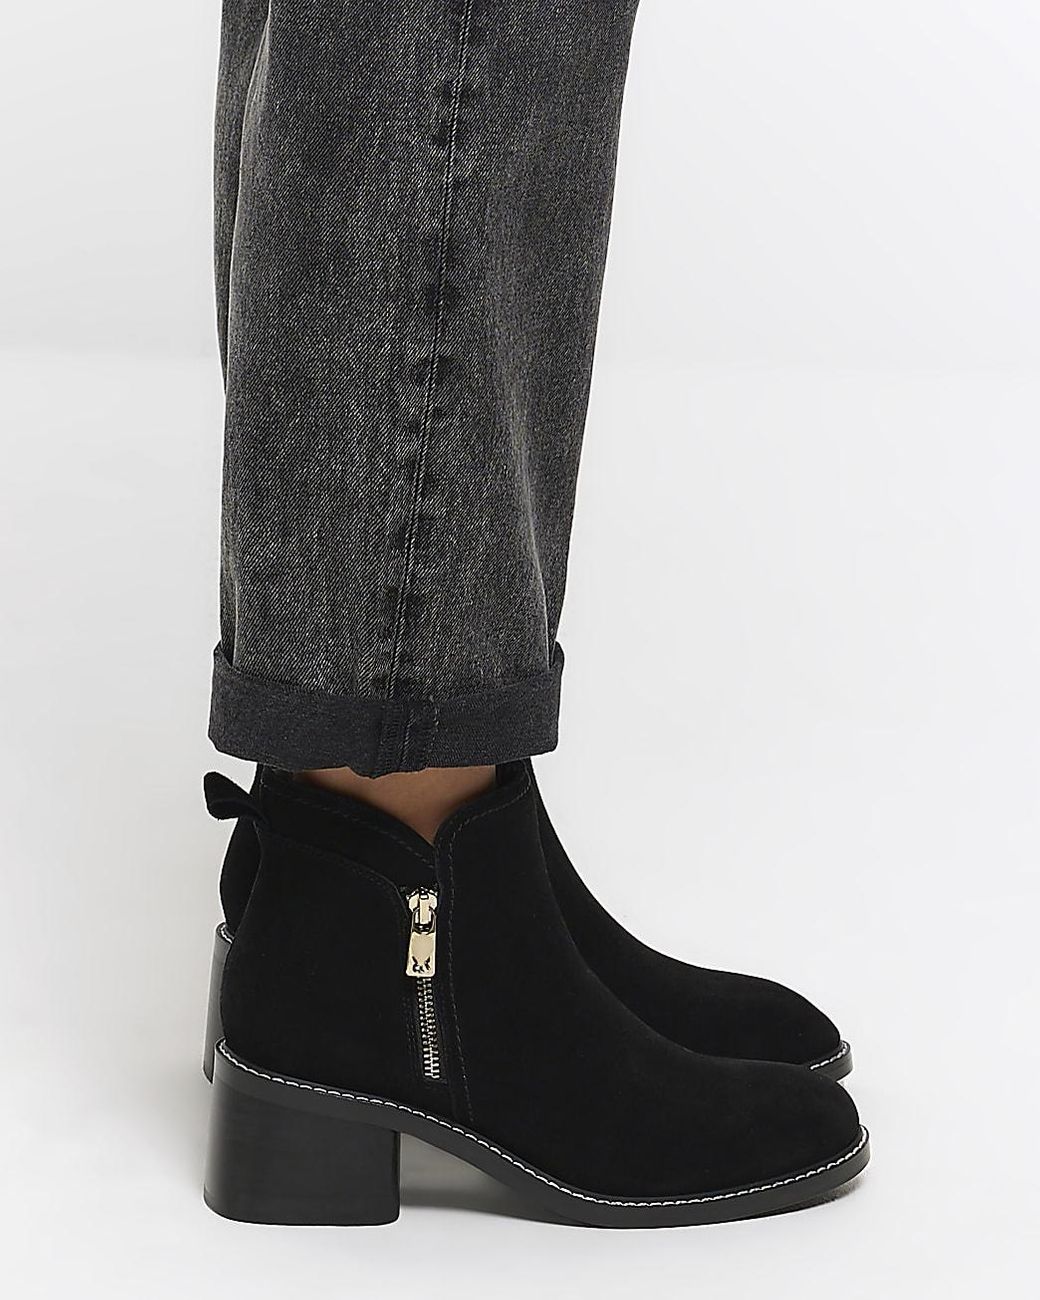 River Island Black Suede Heeled Ankle Boots